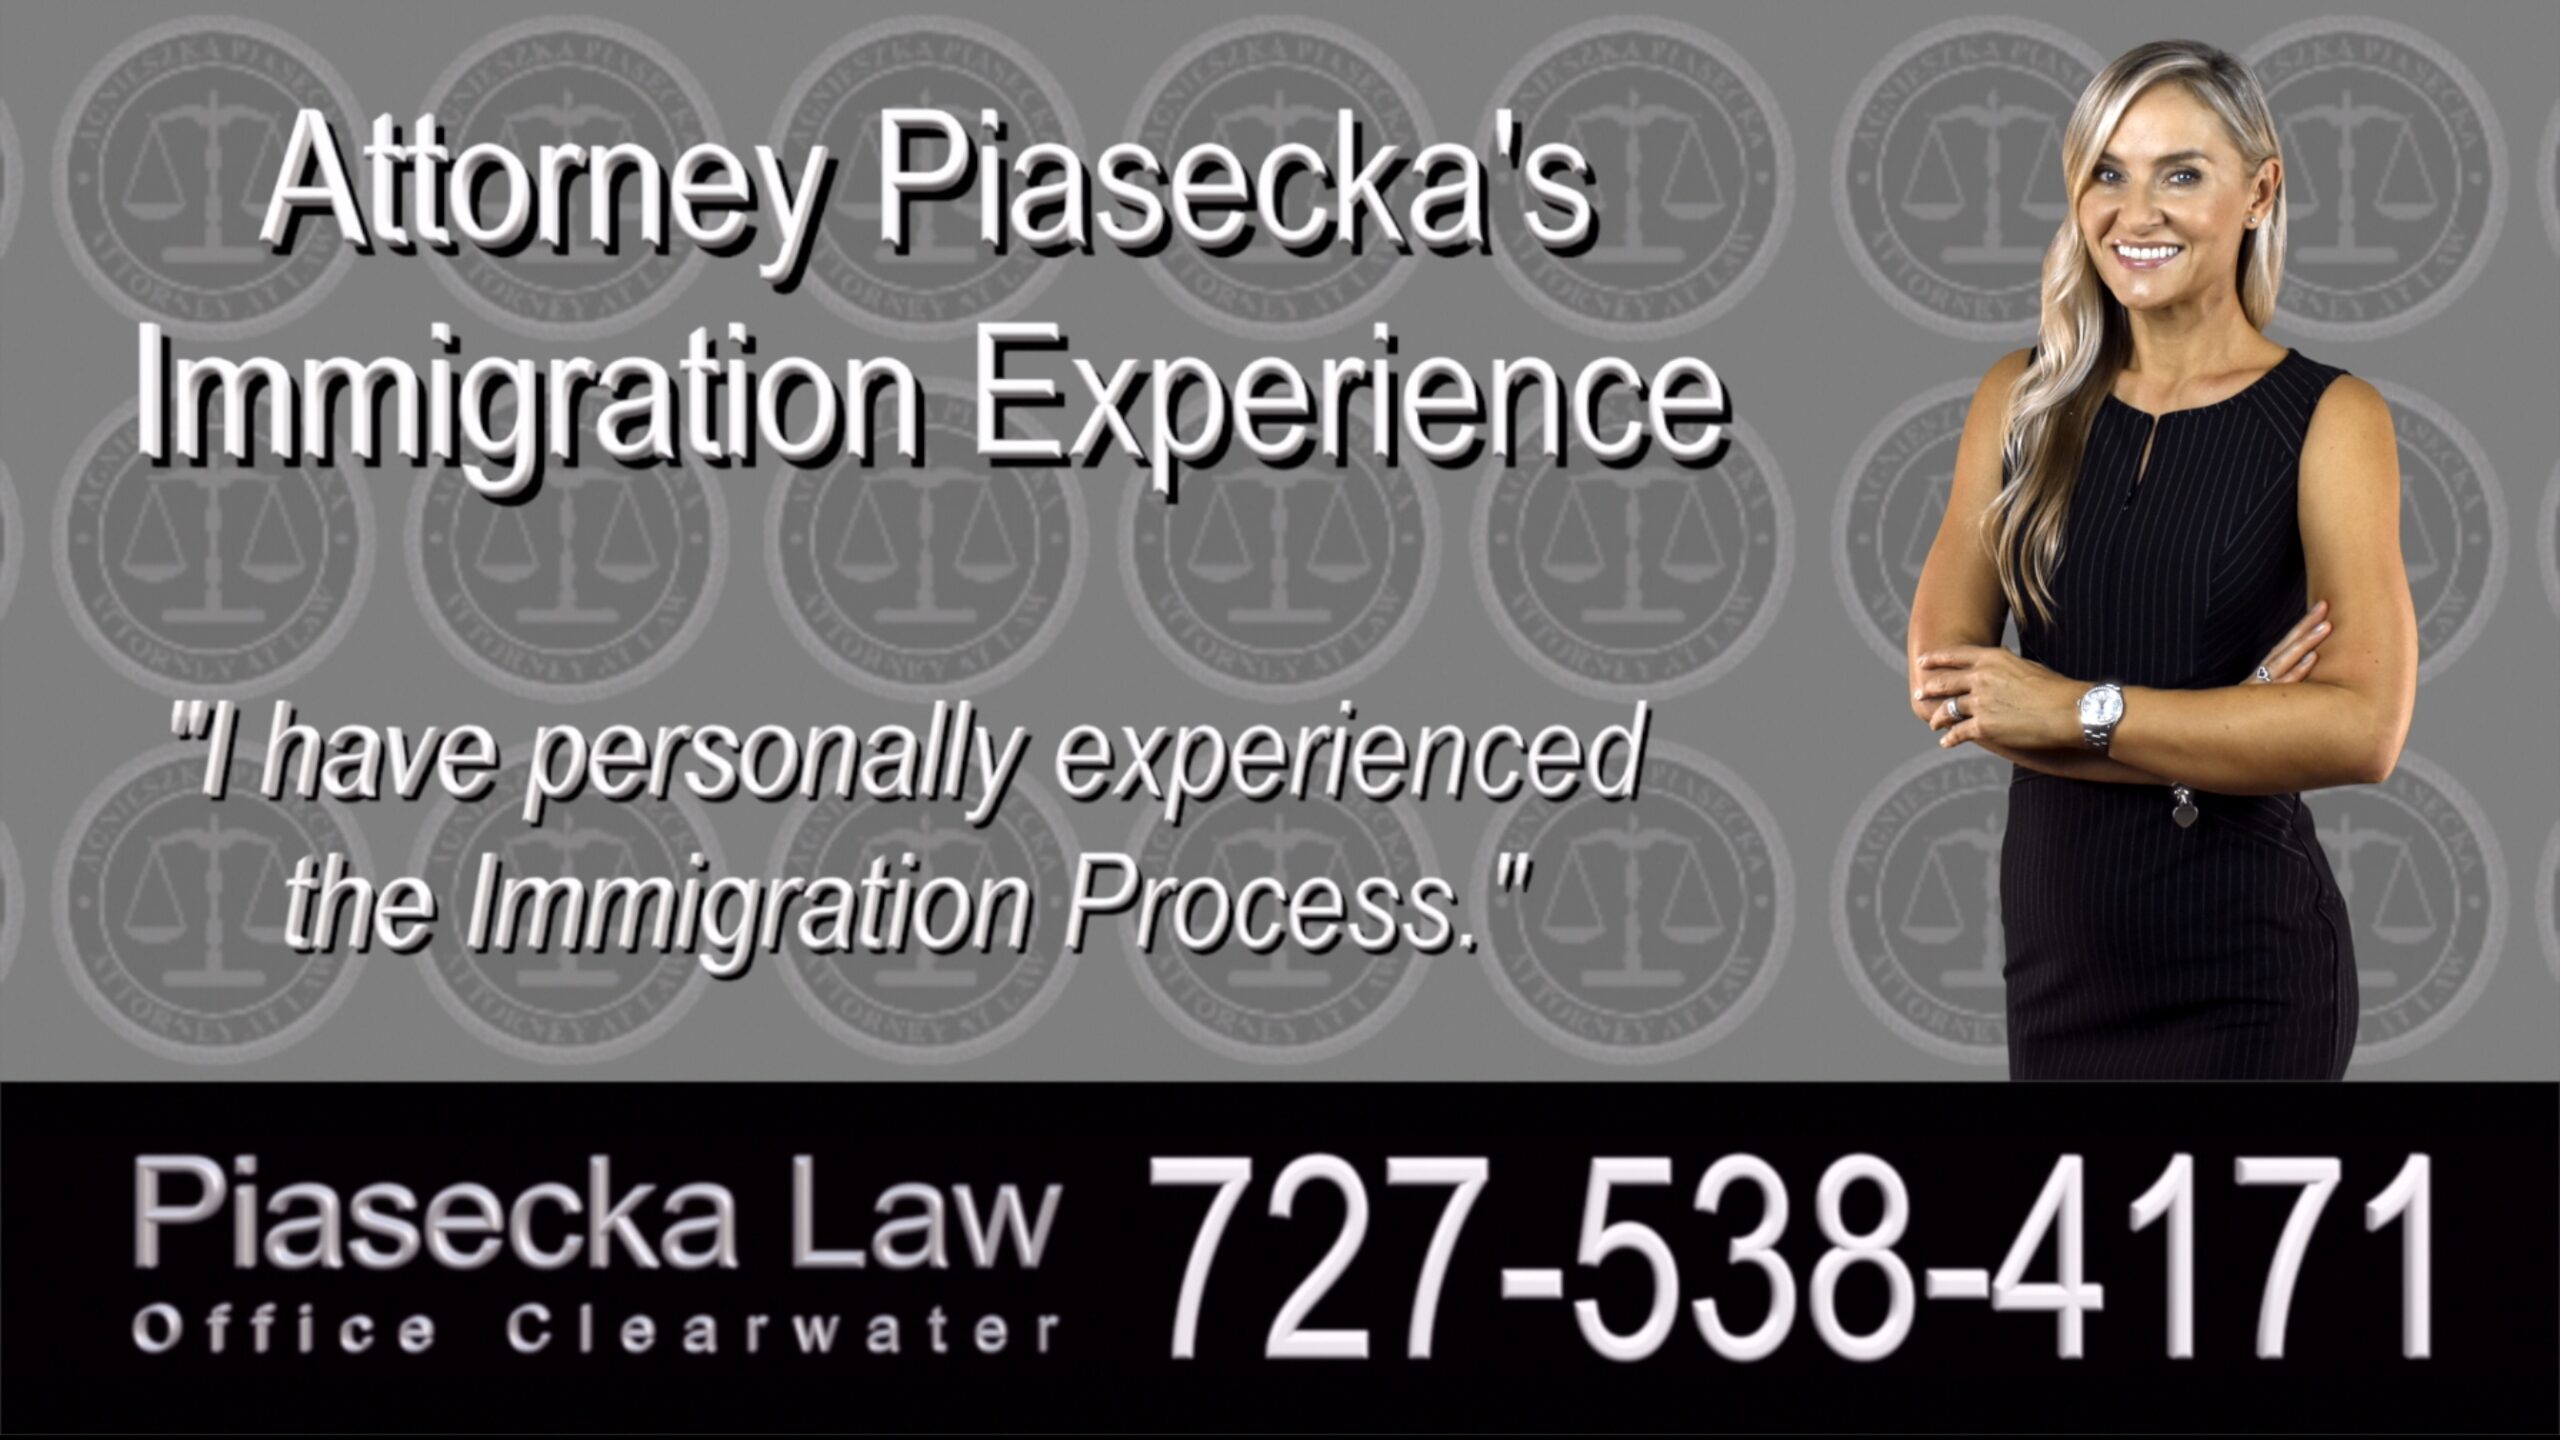 Polish Immigration Attorney Piasecka's U.S. Immigration Experience